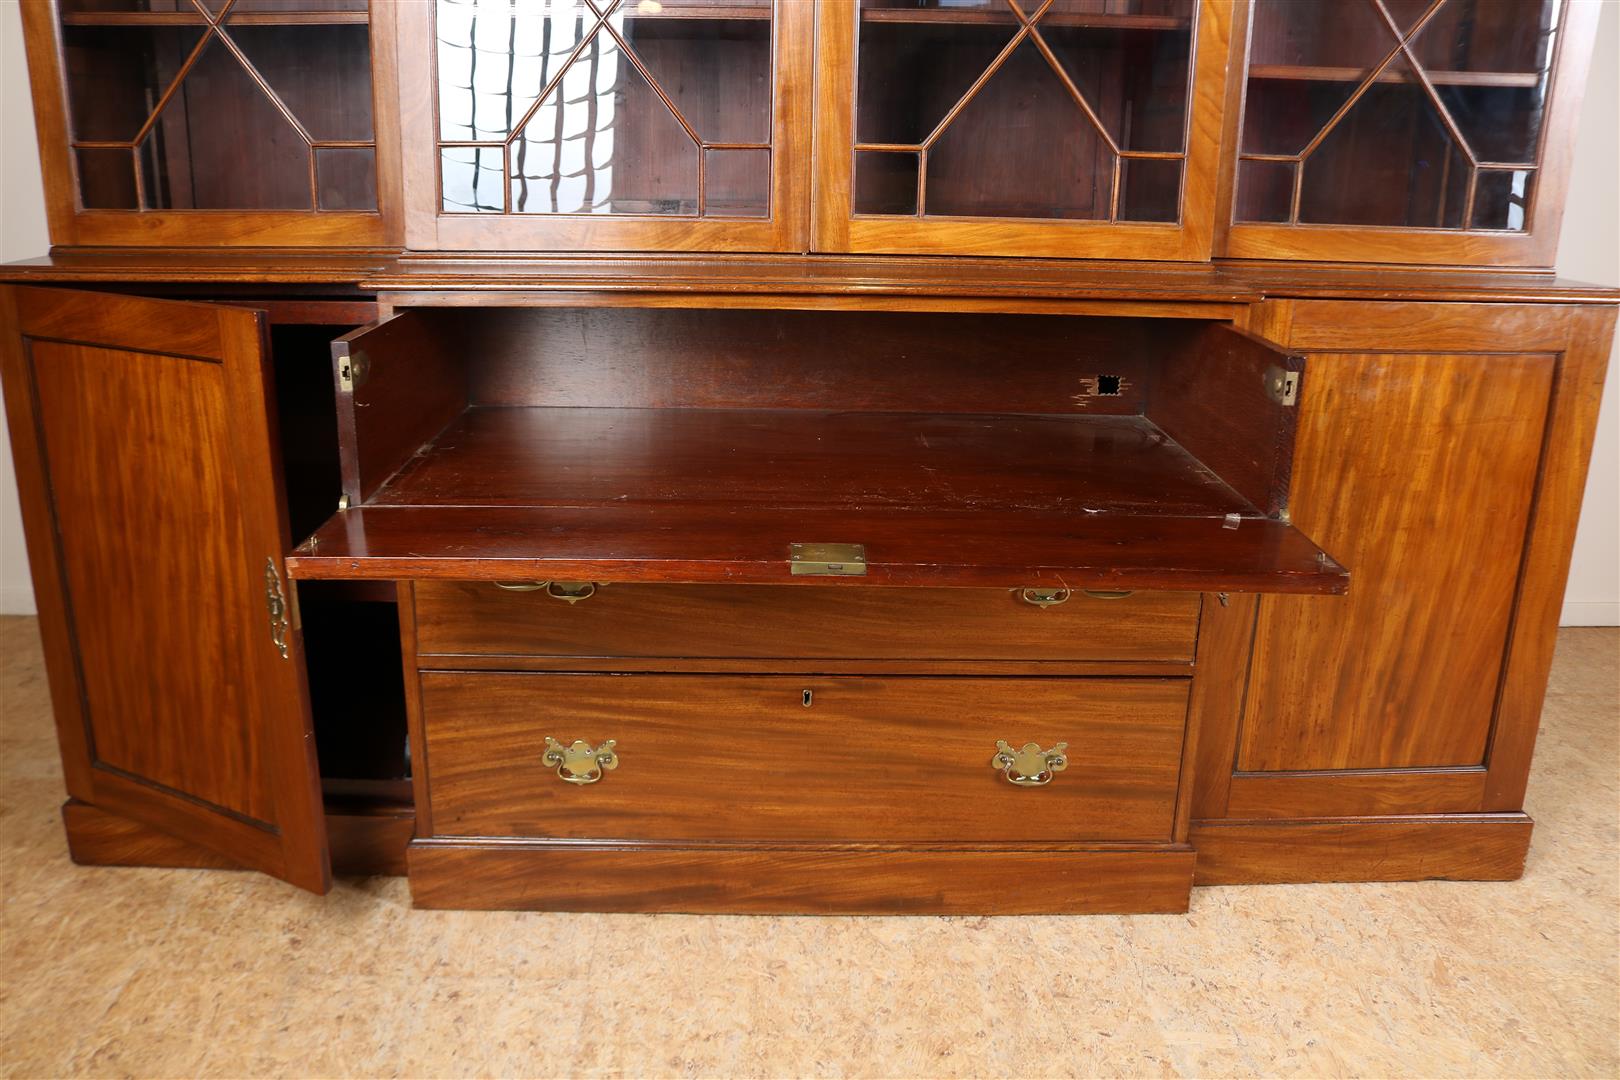 Mahogany Edwardian Breakfront bookcase with 4 window glass doors, 2 panel doors and 3 drawers, - Image 4 of 5